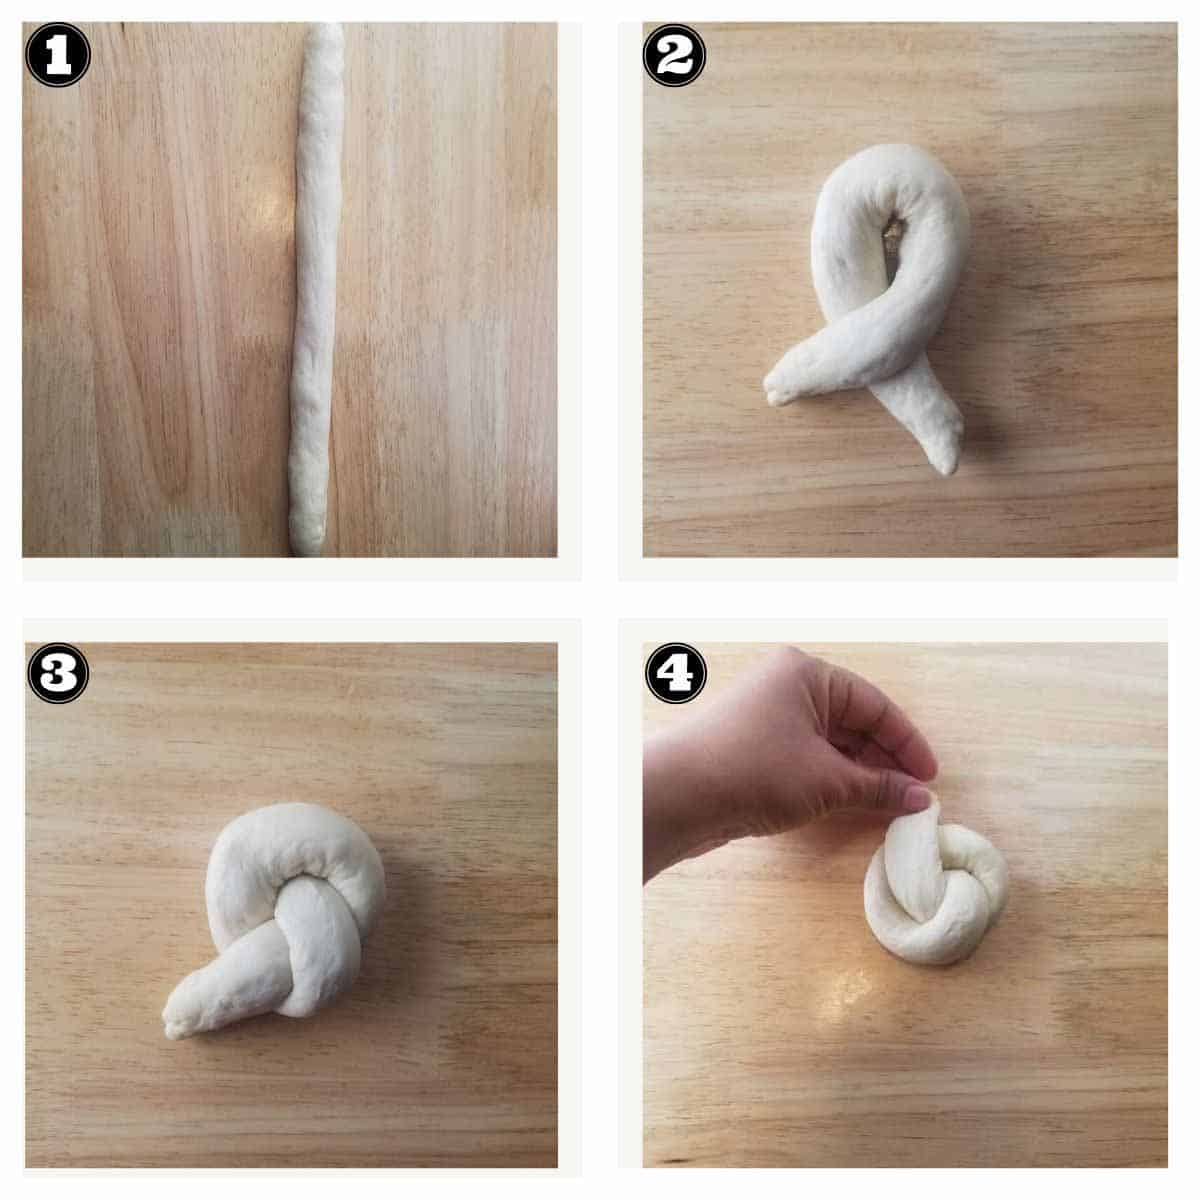 images showing the steps for shaping the perfectly braided challah roll